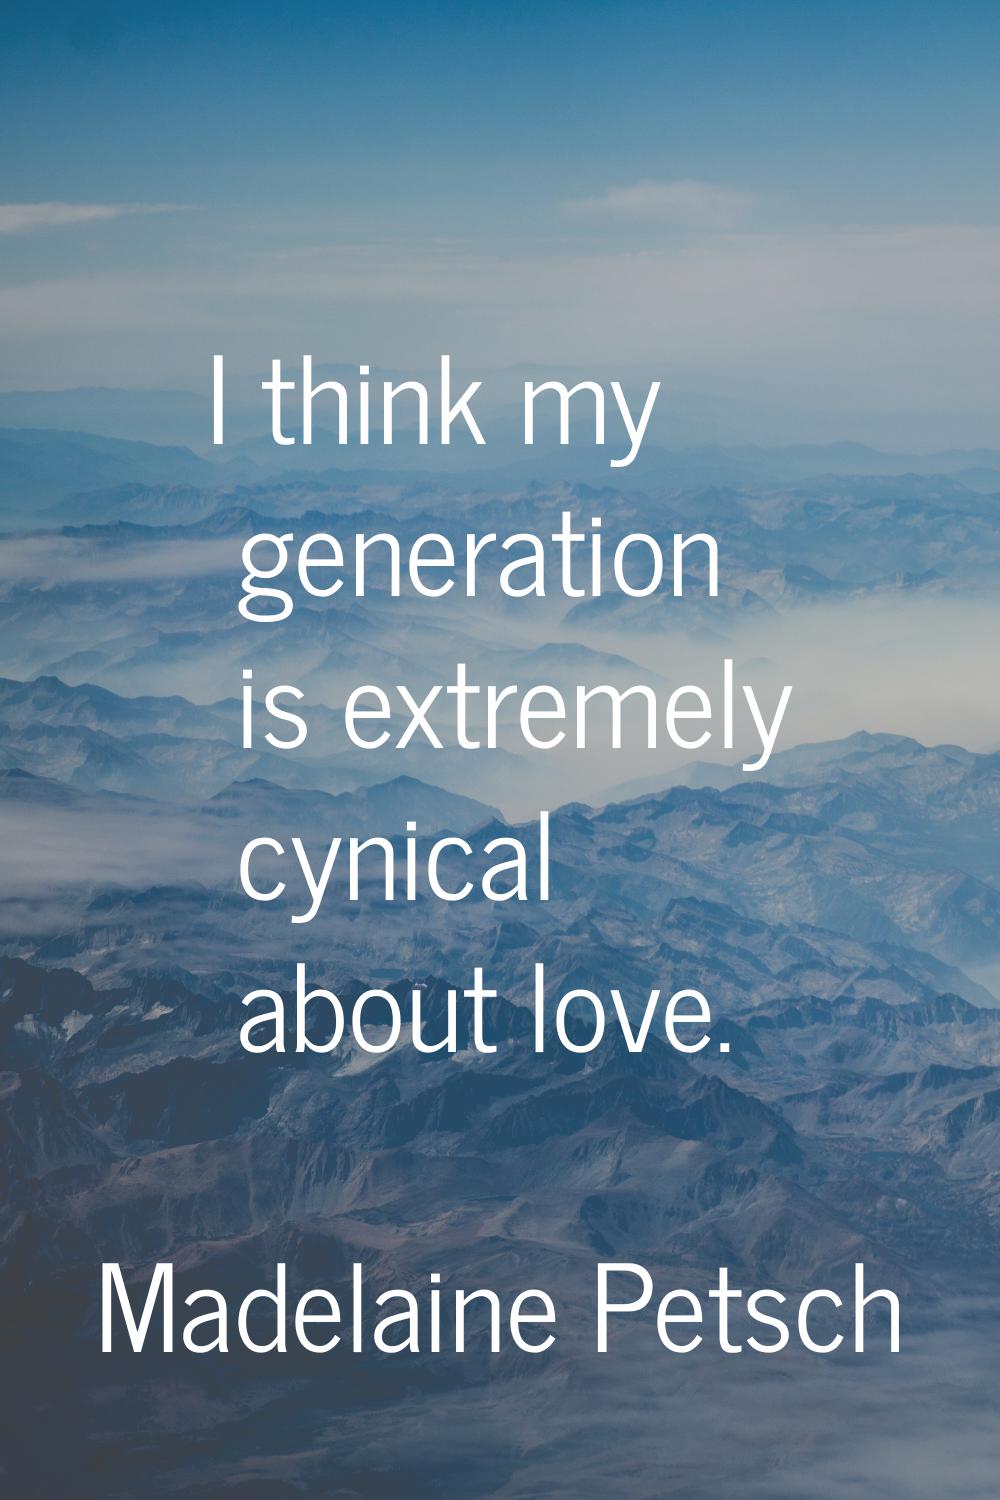 I think my generation is extremely cynical about love.